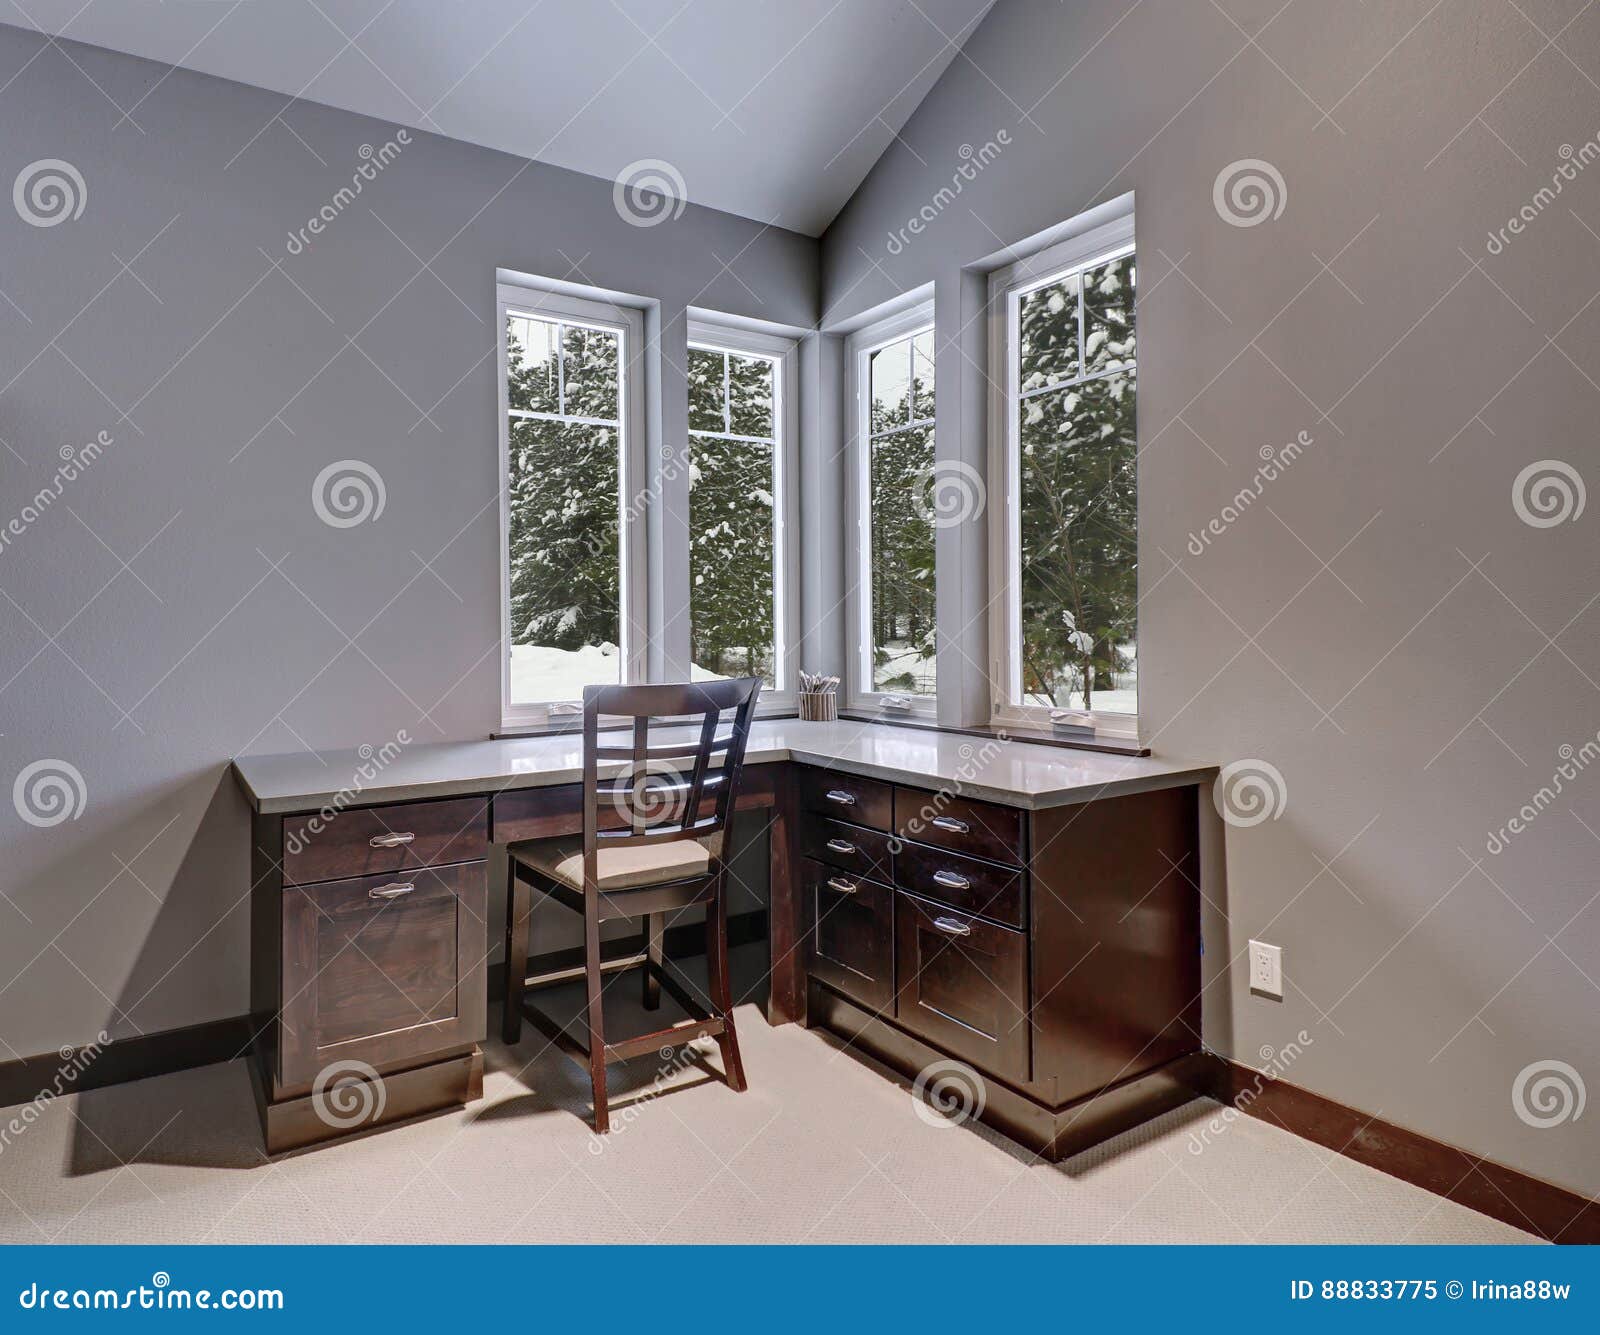 Gray And Blue Home Office Features A Vaulted Ceiling Stock Image